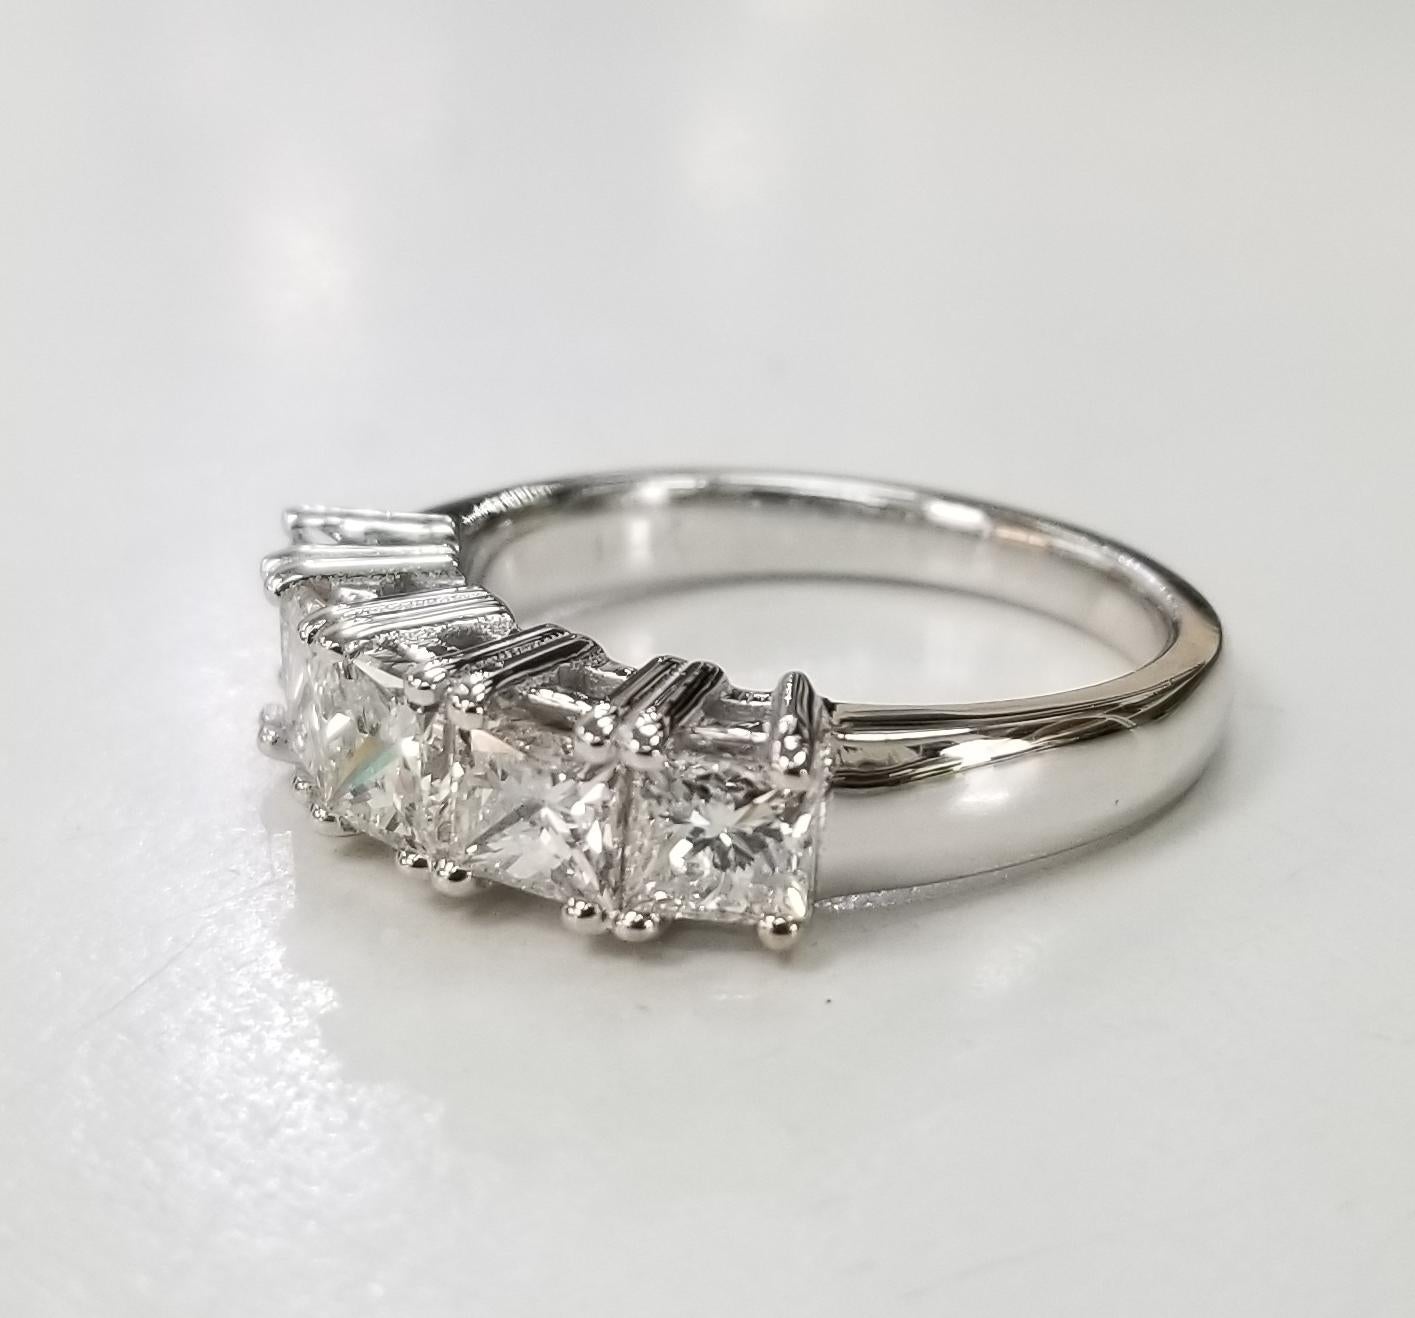 14k white gold 5 princess cut diamonds anniversary wedding ring, containing 5 princess cut diamonds; color F-G, clarity VS2-SI1 and  weight 2.05 cts. (average size diamonds.40pts.) ring size is 6.75 and can be sized to fit for free.